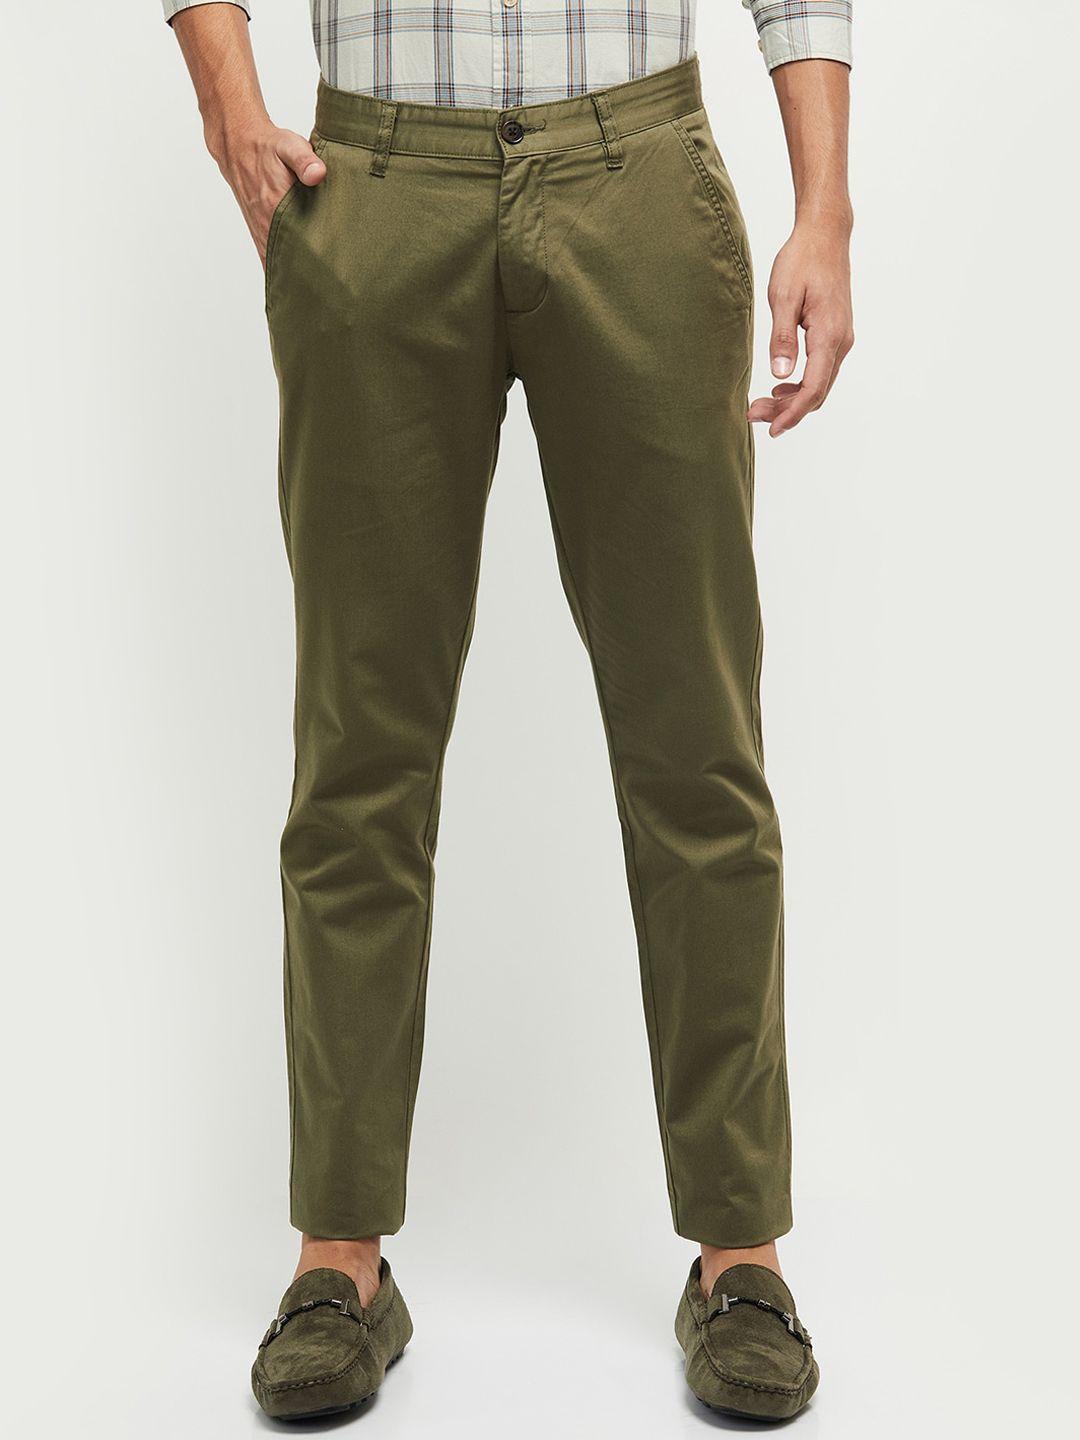 max men green chinos trousers